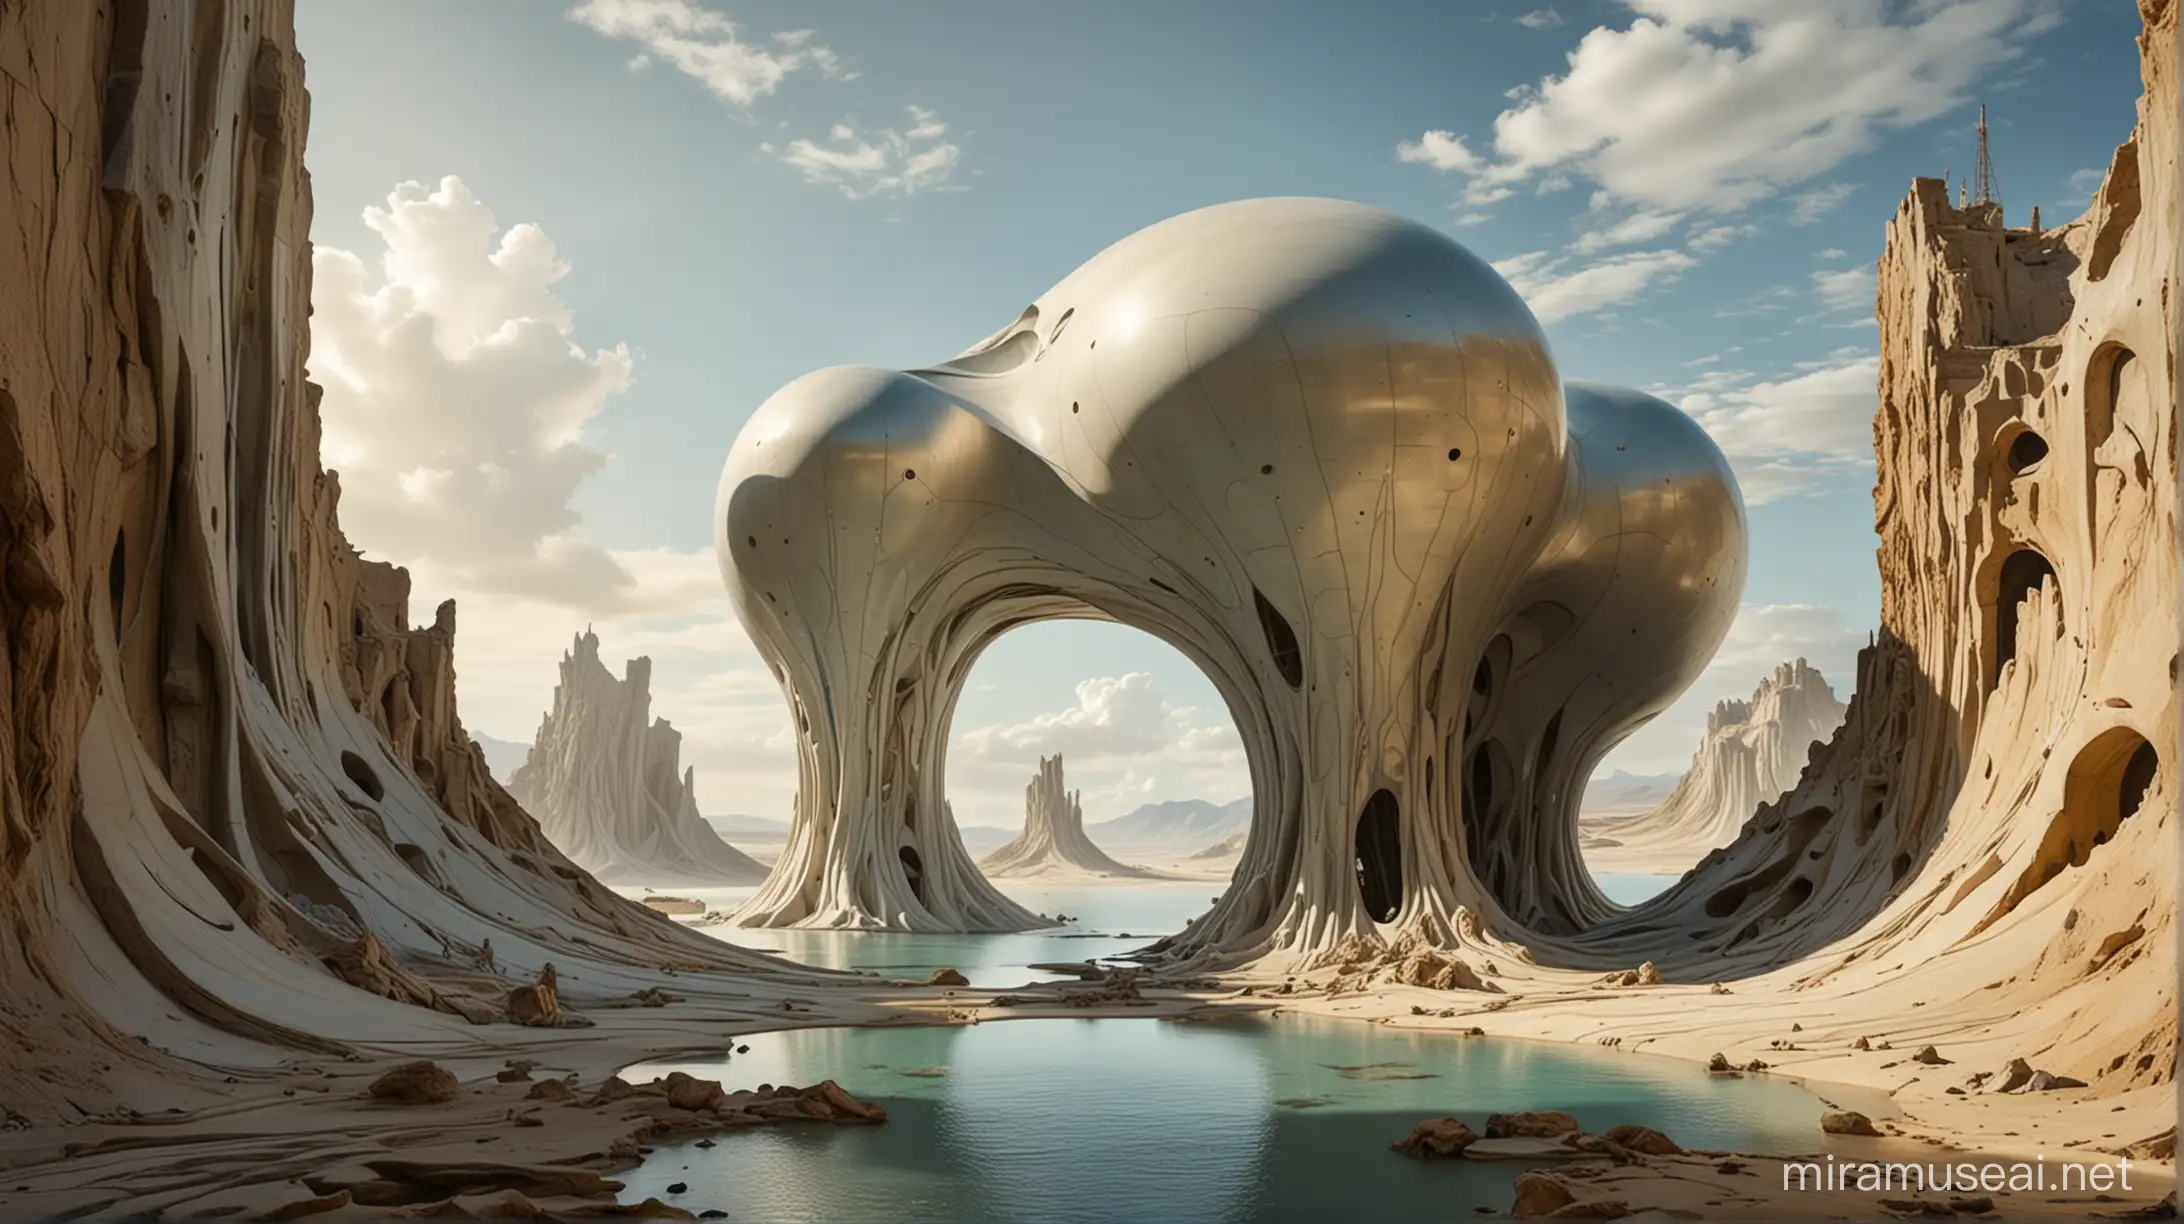 Abstract Structures Emerge in Surreal Landscape